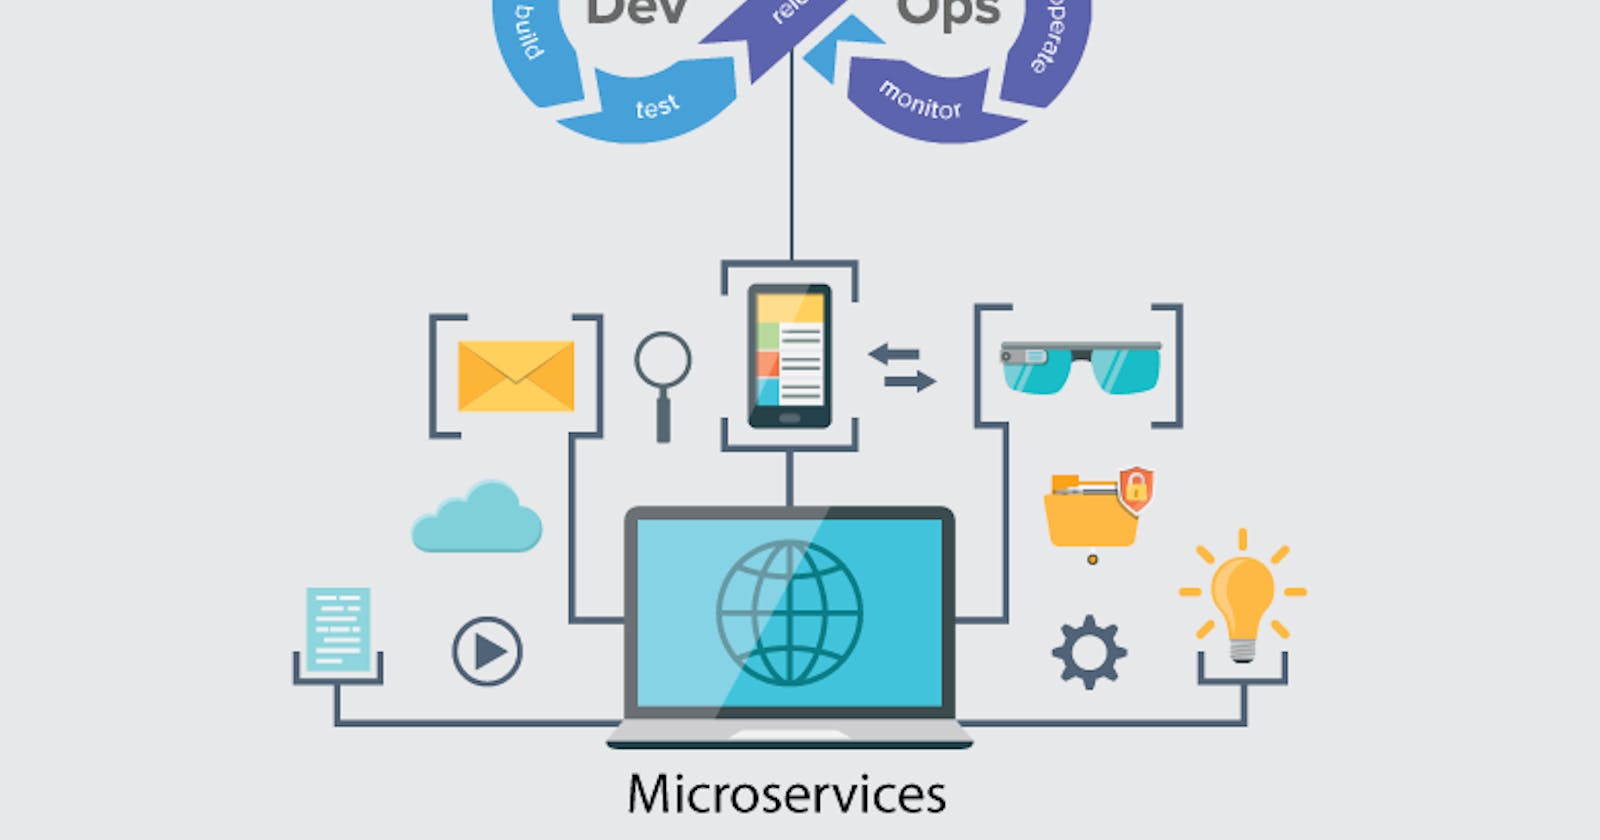 Building a Scalable Microservices Architecture: An End-to-End DevOps Journey